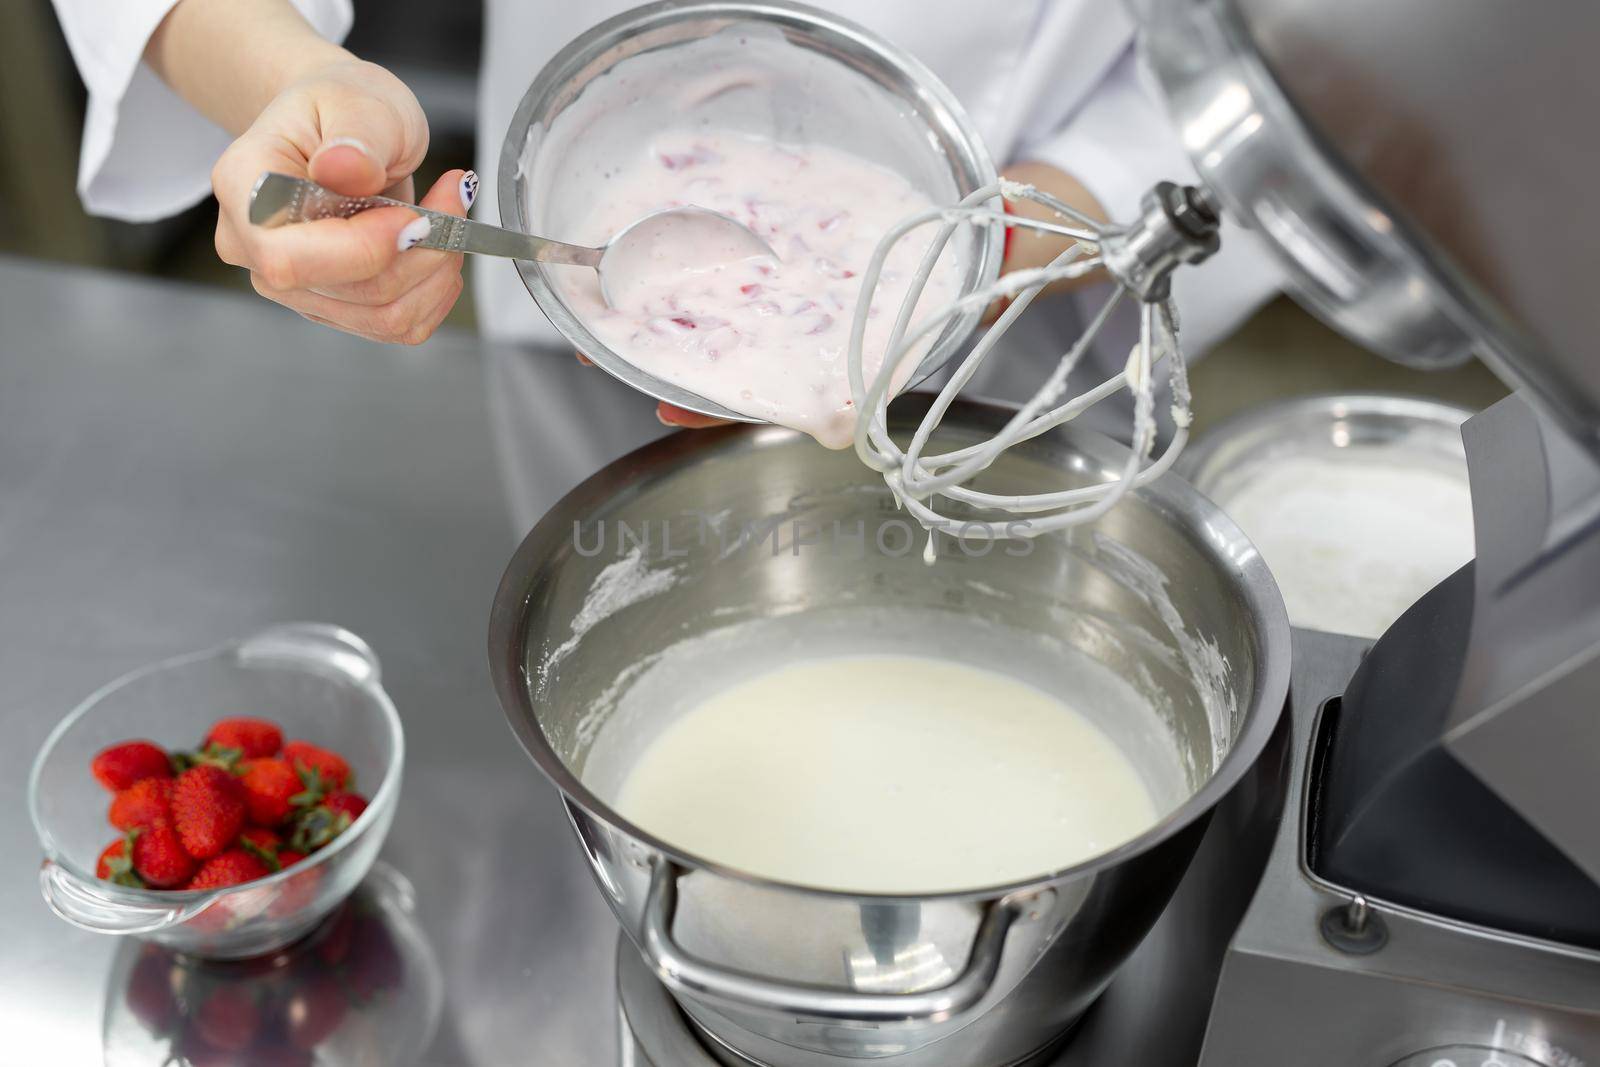 Pastry chef adds cream and strawberries to the bowl of the mixer and knead the dough.